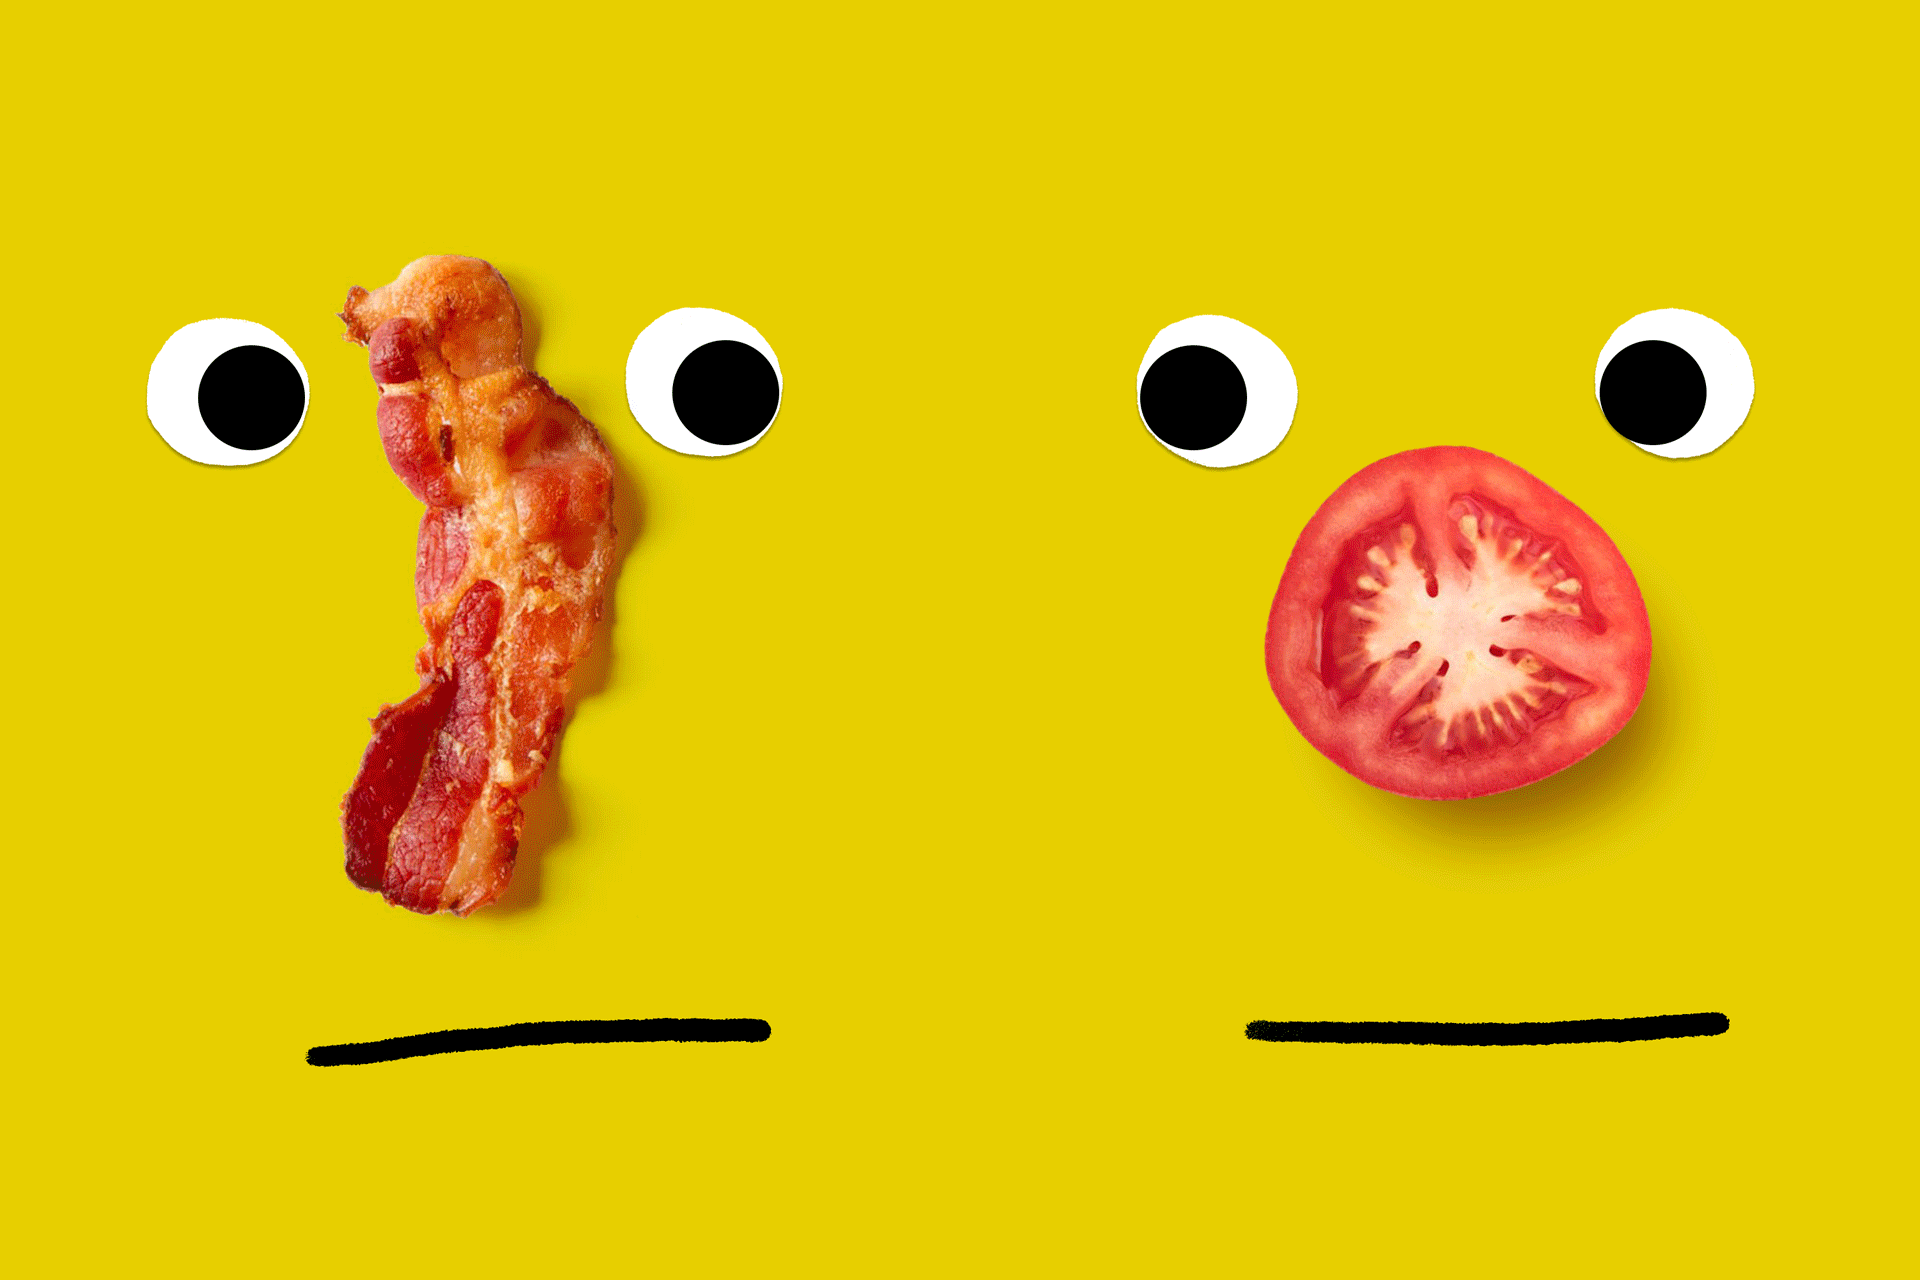 Photo illustration of two comic faces with animated noses formed from meat and vegetarian foods